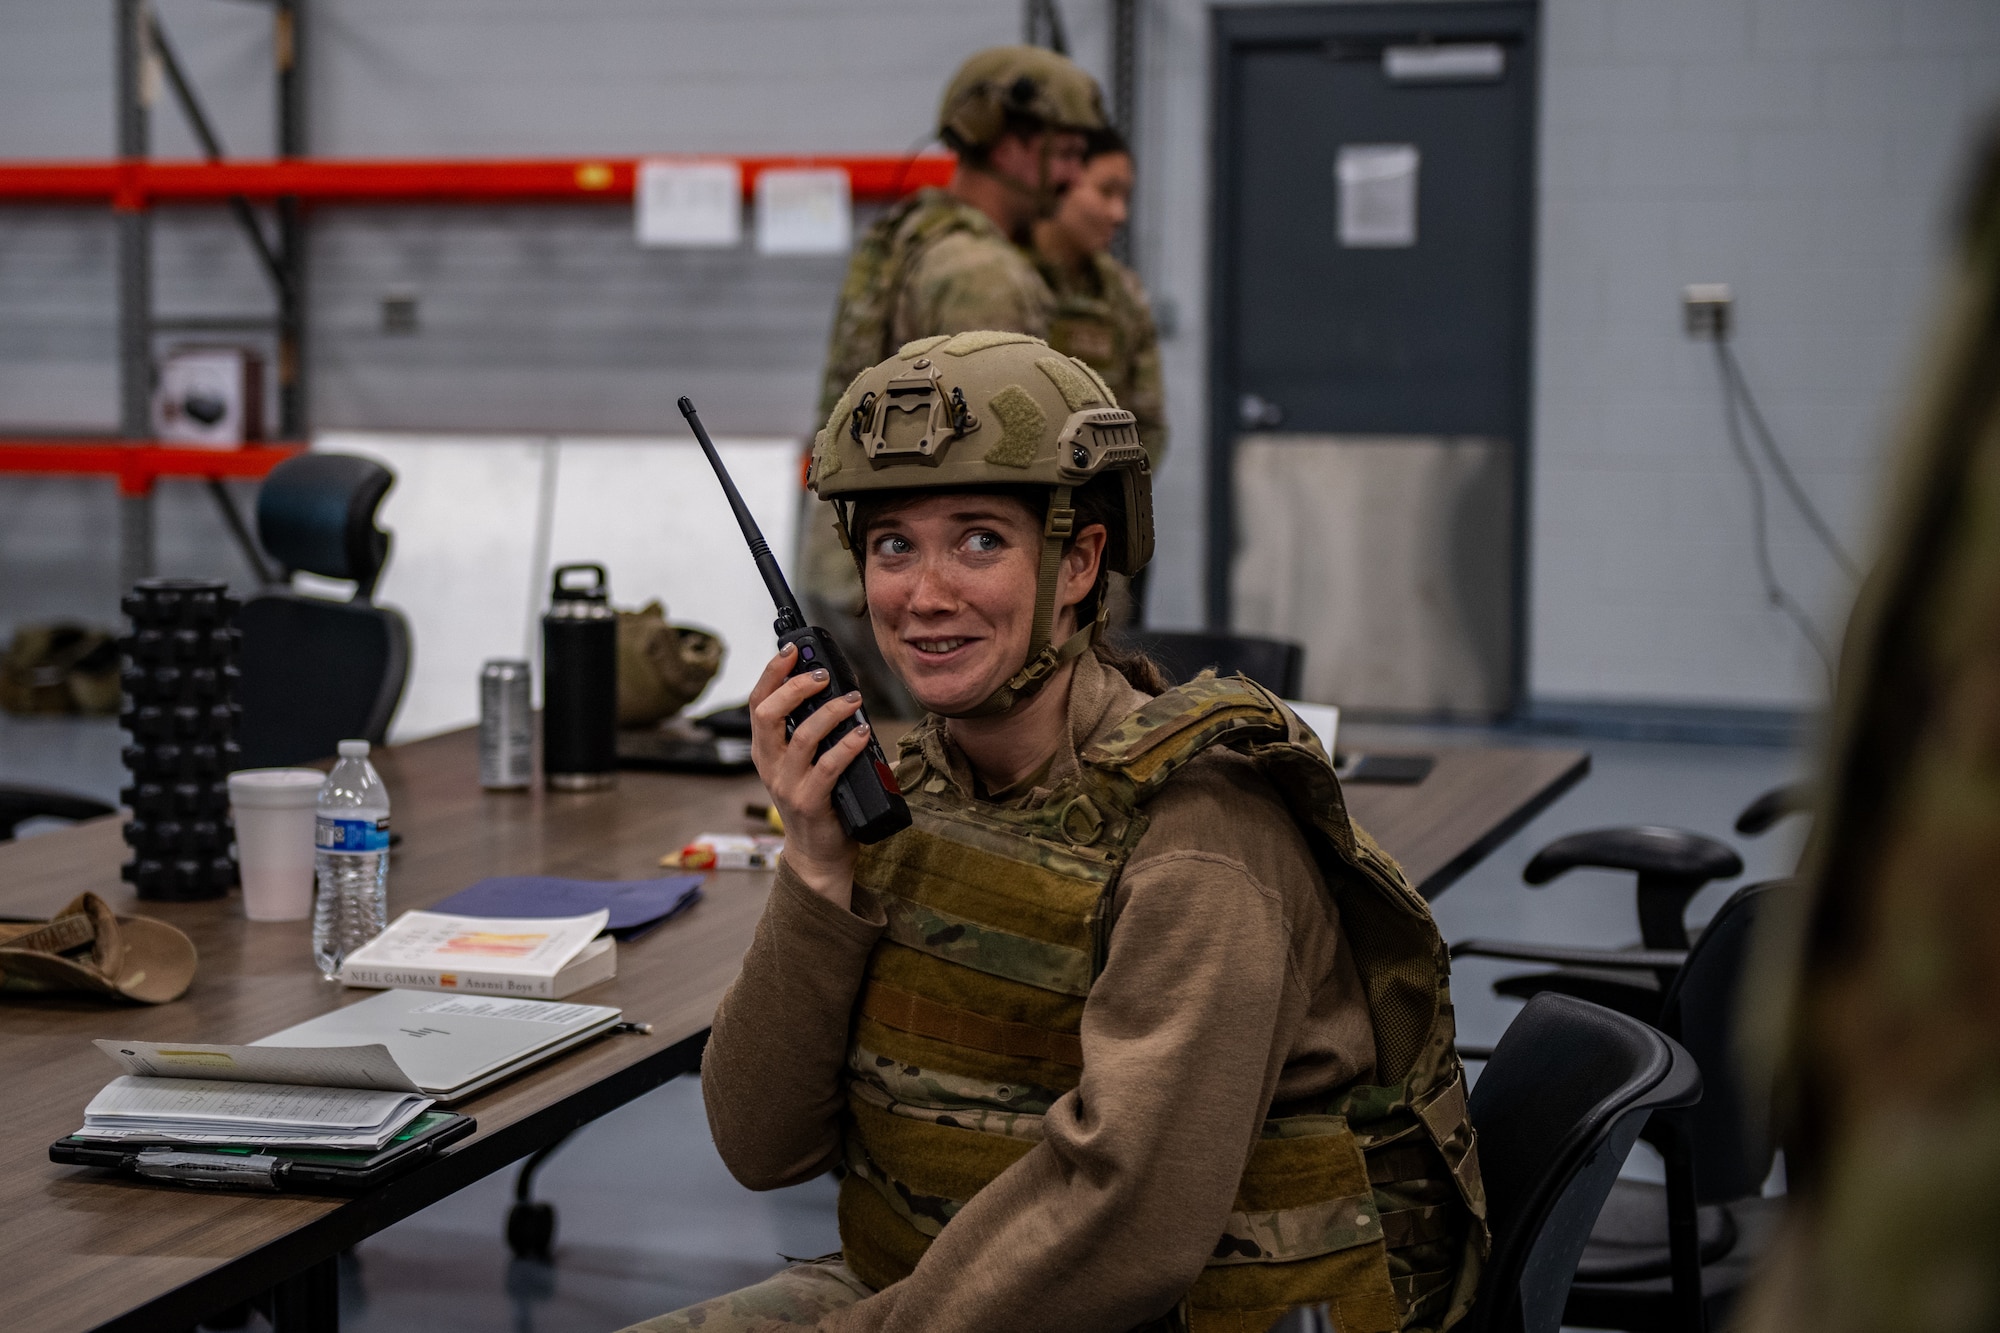 U.S. Air Force Capt. Francis Graff, 71st Rescue Squadron combat systems officer, listens to a radio call from the forward operating site during Exercise Ready Tiger 24-1 at Savannah Air National Guard Base Georgia April 12, 2024. During Ready Tiger 24-1, exercise inspectors will assess the 23rd Wing's proficiency in employing decentralized command and control to fulfill air tasking orders across geographically dispersed areas amid communication challenges, integrating Agile Combat Employment principles such as integrated combat turns, forward aerial refueling points, multi-capable Airmen, and combat search and rescue capabilities. (U.S. Air Force photo by Senior Airman Courtney Sebastianelli)